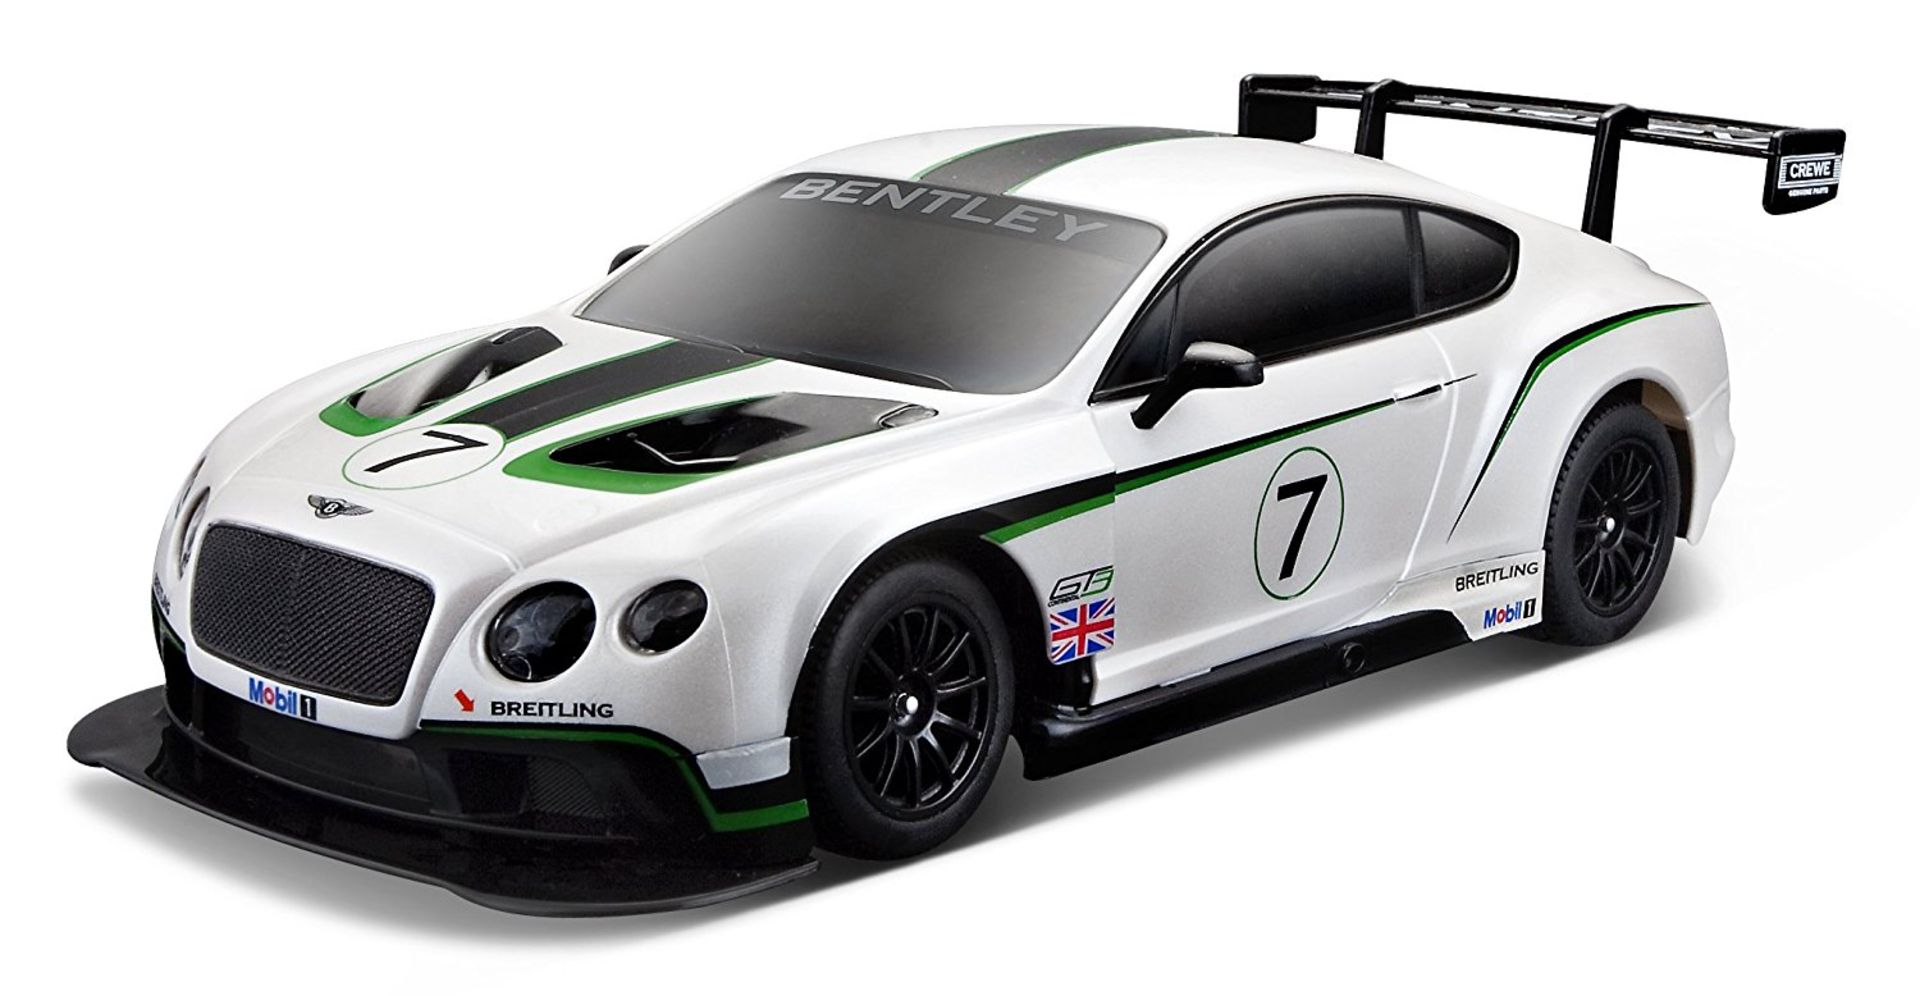 V Brand New R/C 1:14 Scale Bentley Continental GT3 - Amazon price £36.99 - Colours May Vary X 2 YOUR